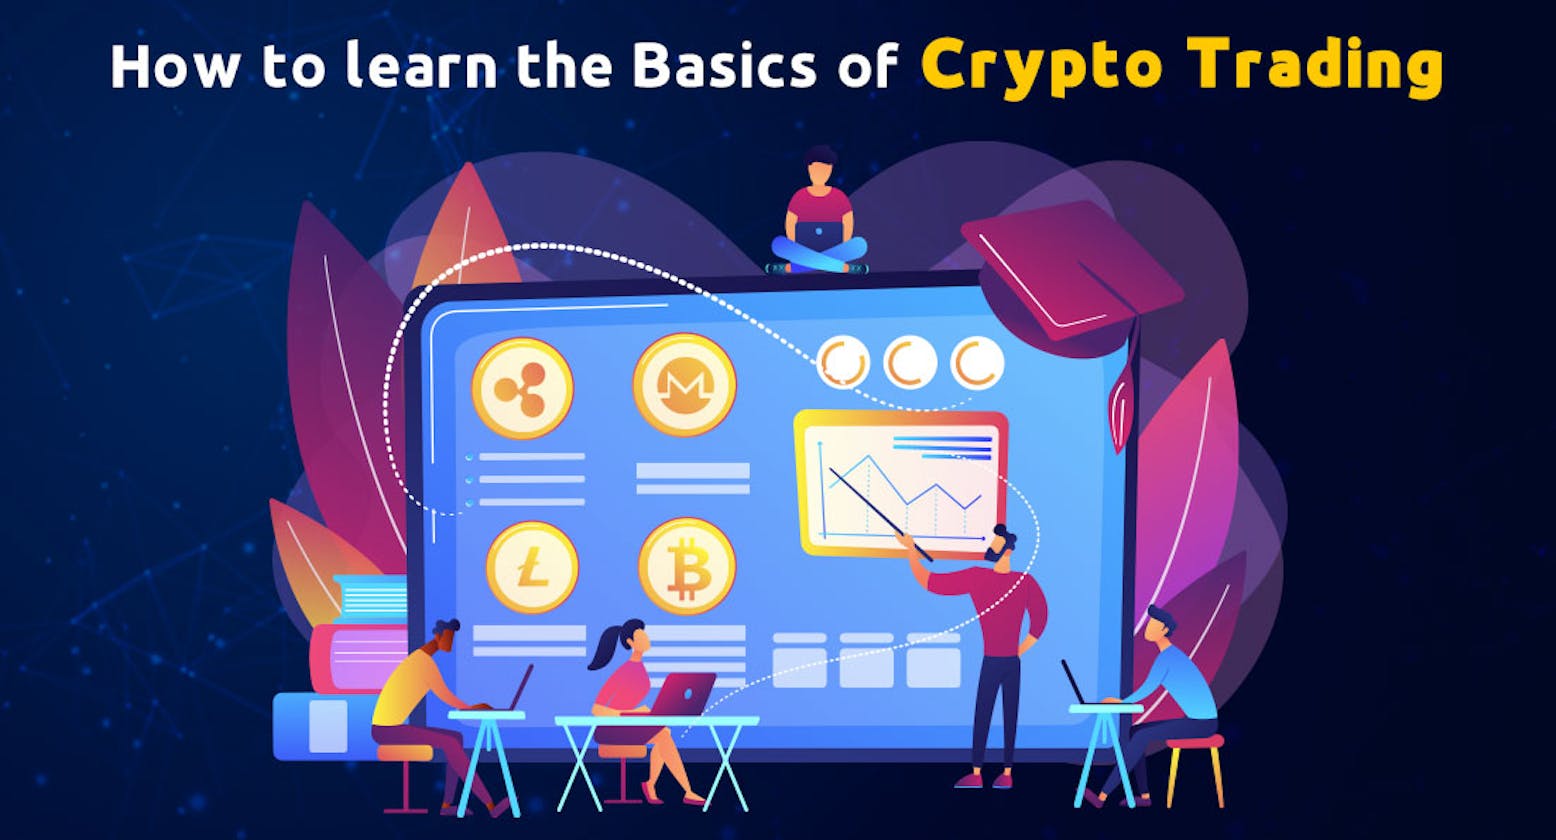 How to learn the Basics of Crypto Trading?